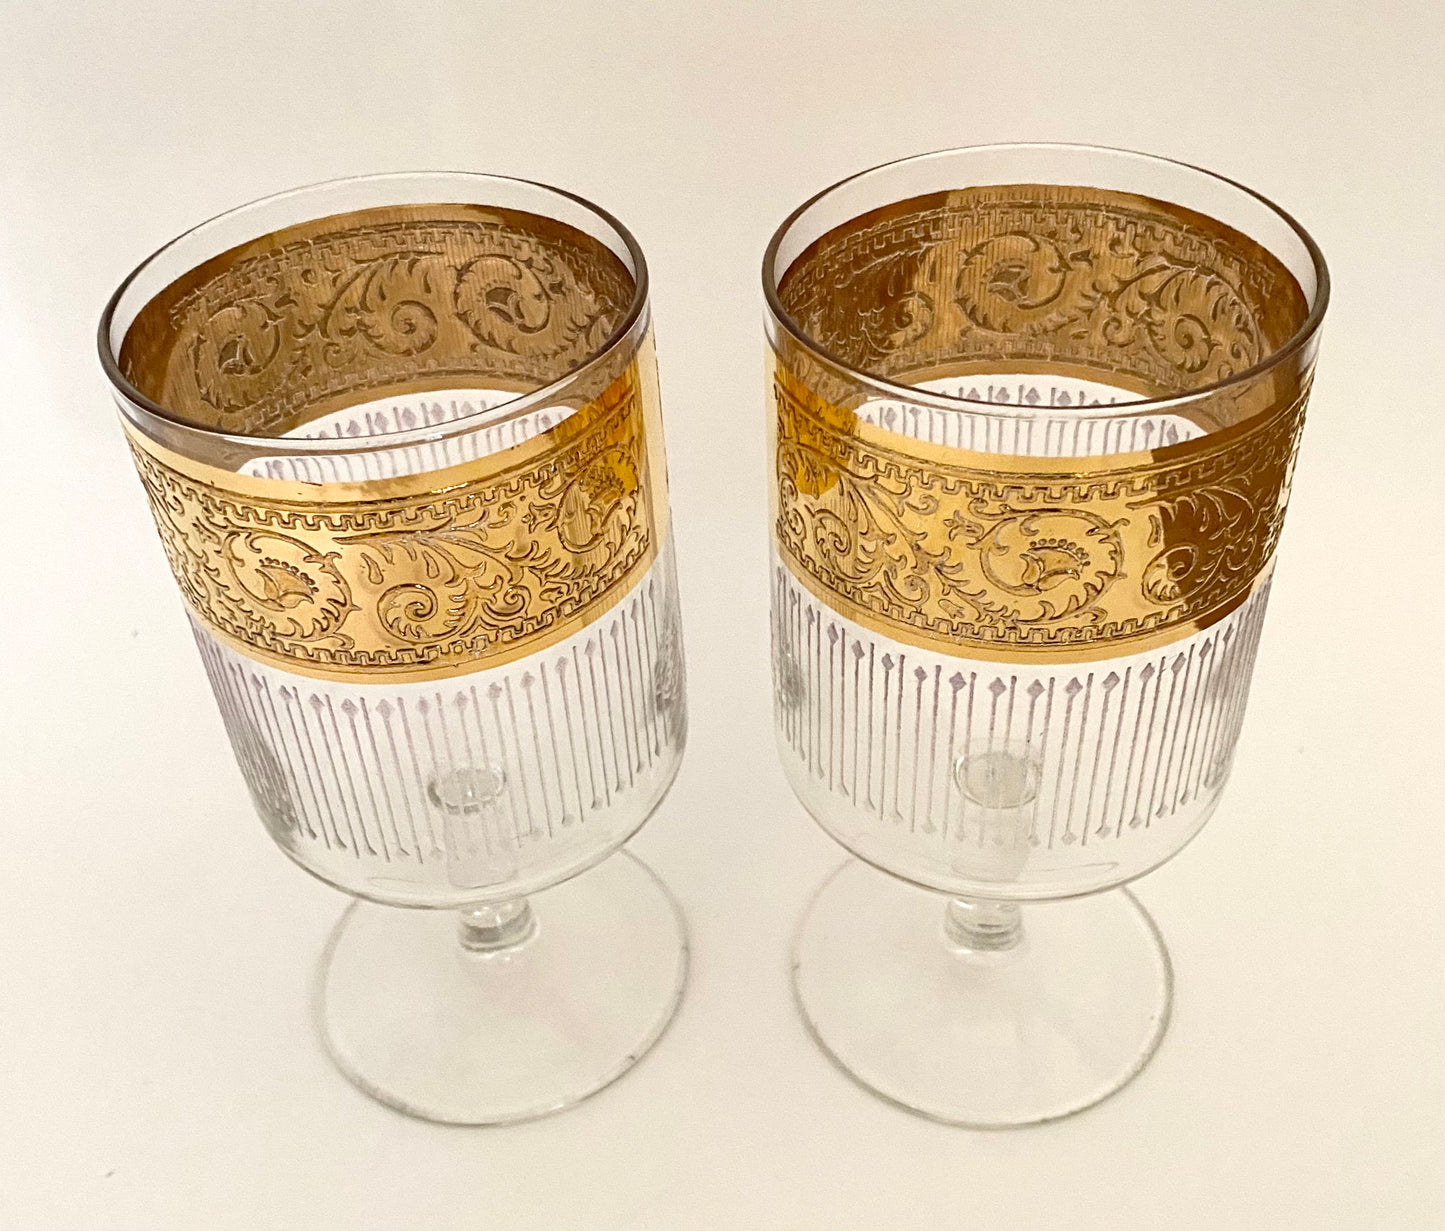 Starlyte Tiffany Stemmed Glass (Pair) 2 Available